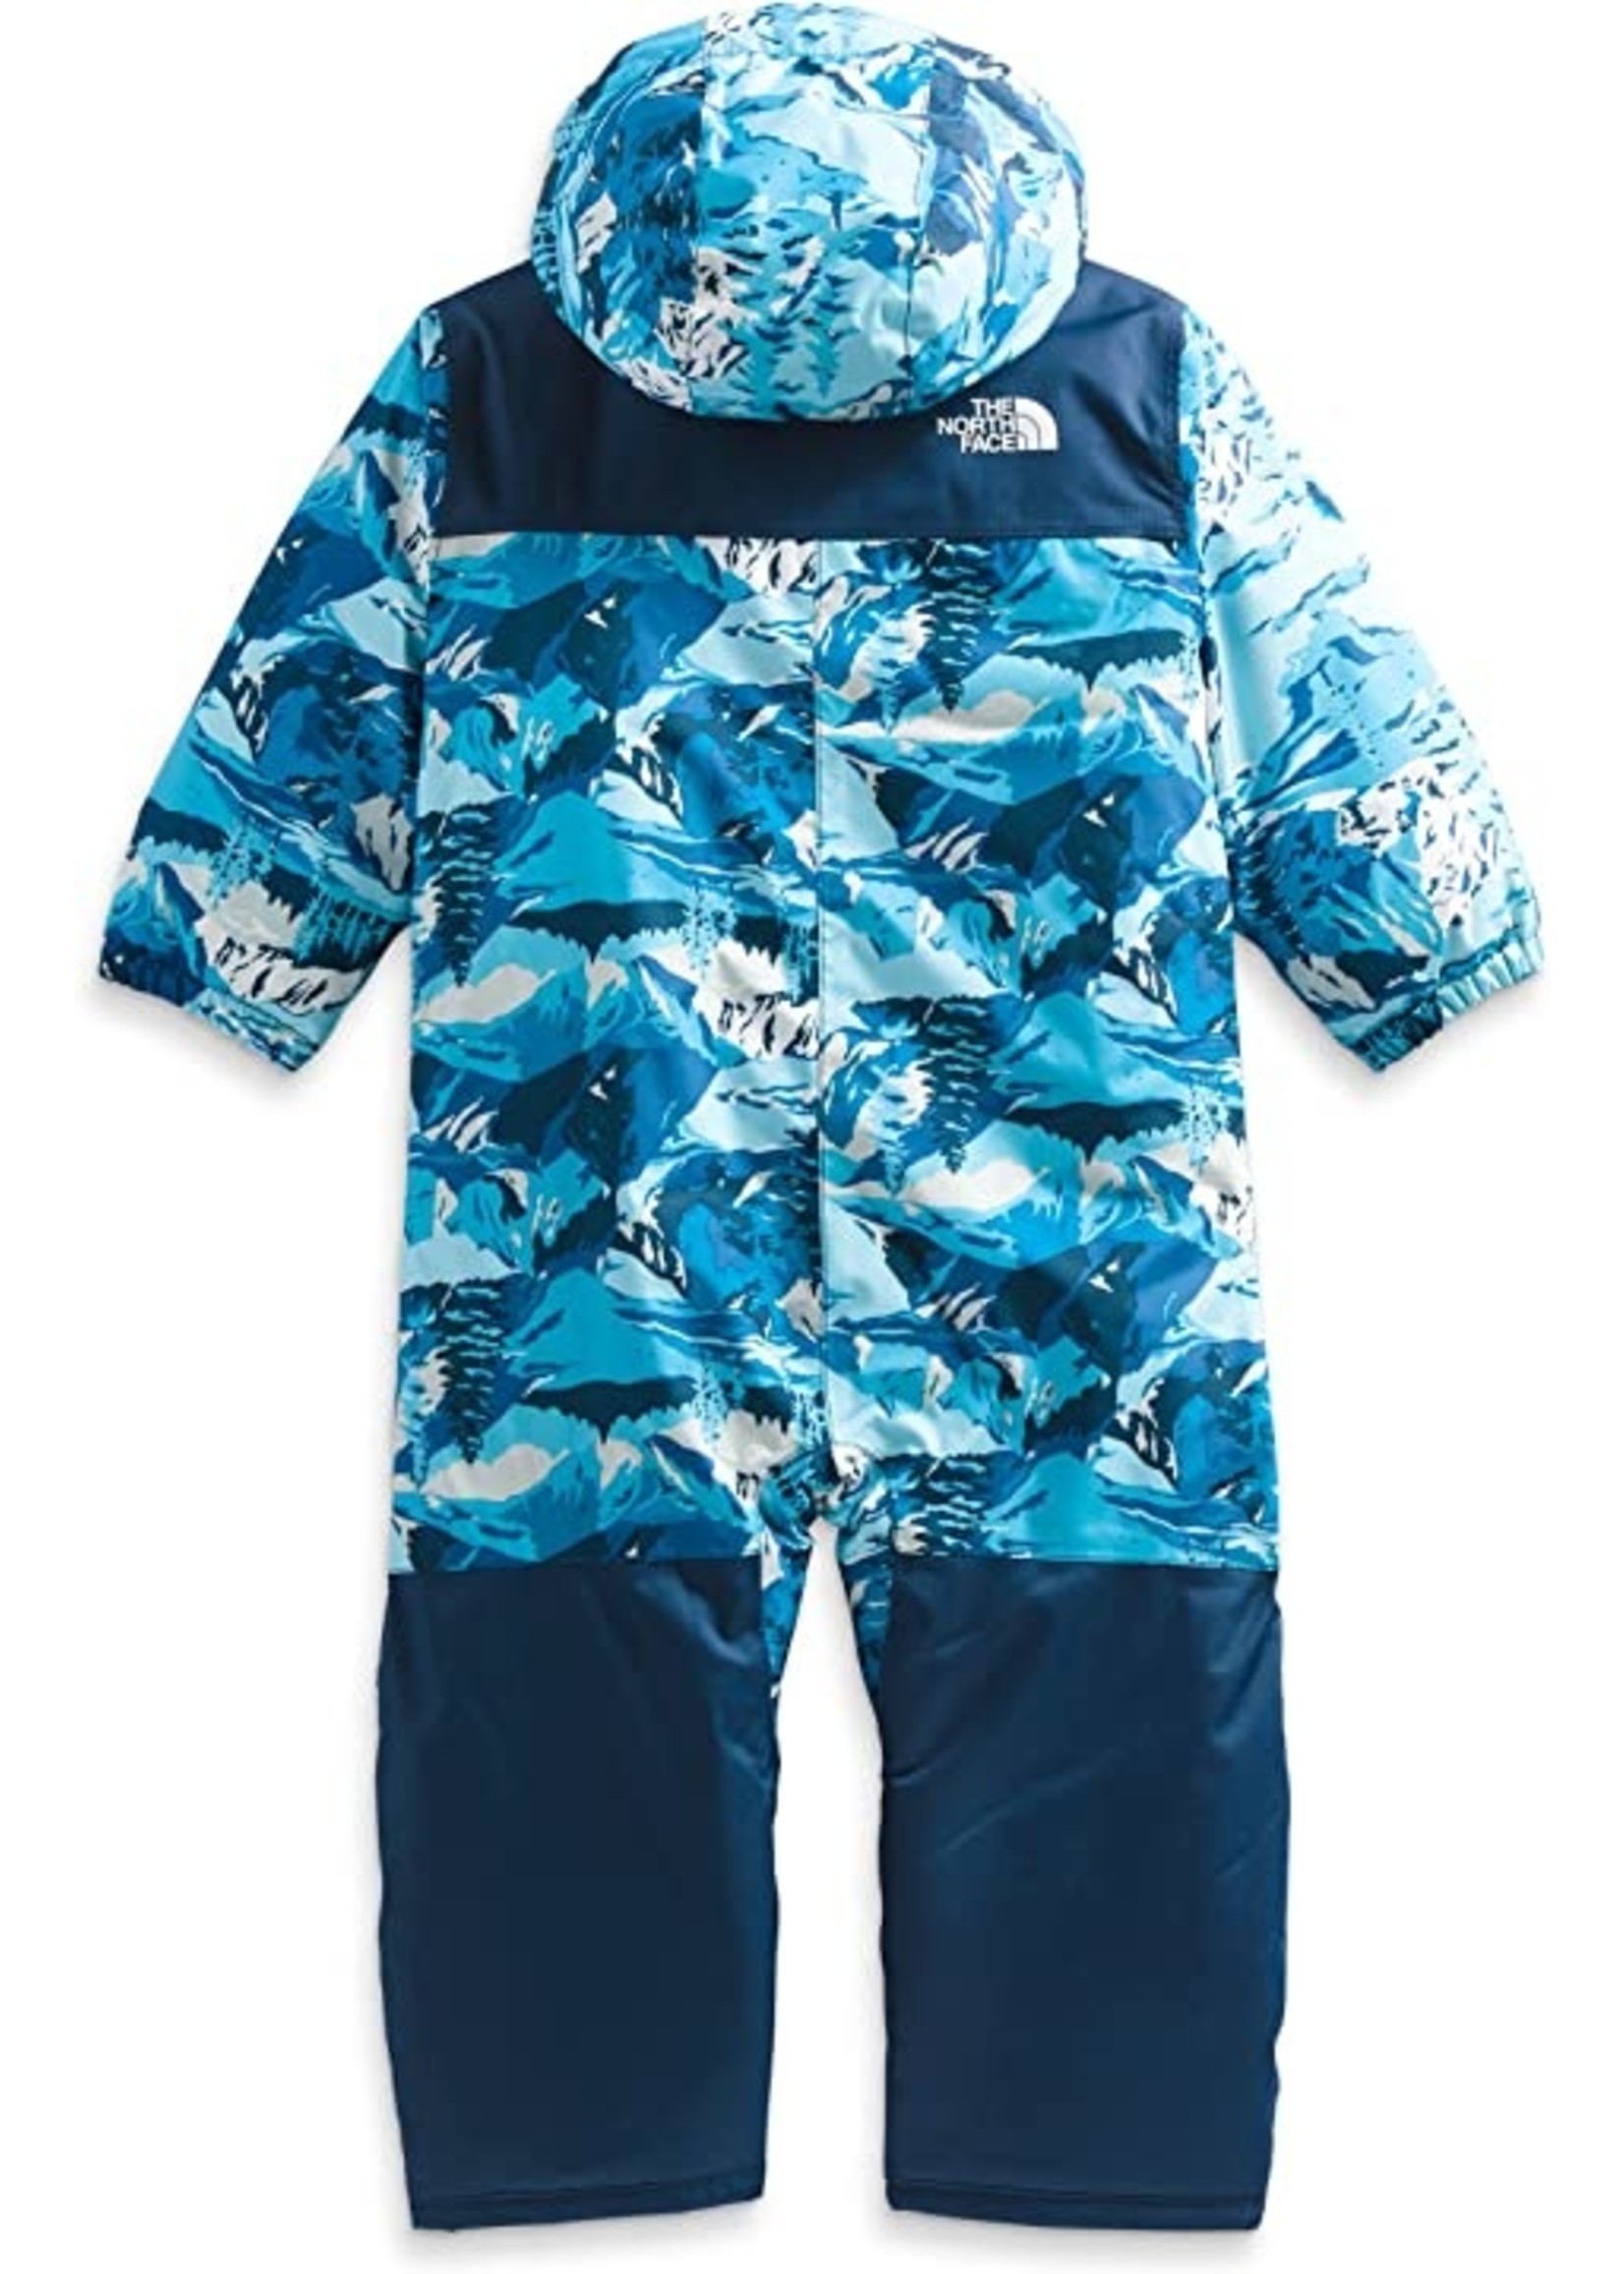 The North Face Baby Freedom Snowsuit - Acoustic Blue Snow Peak Mountains Print